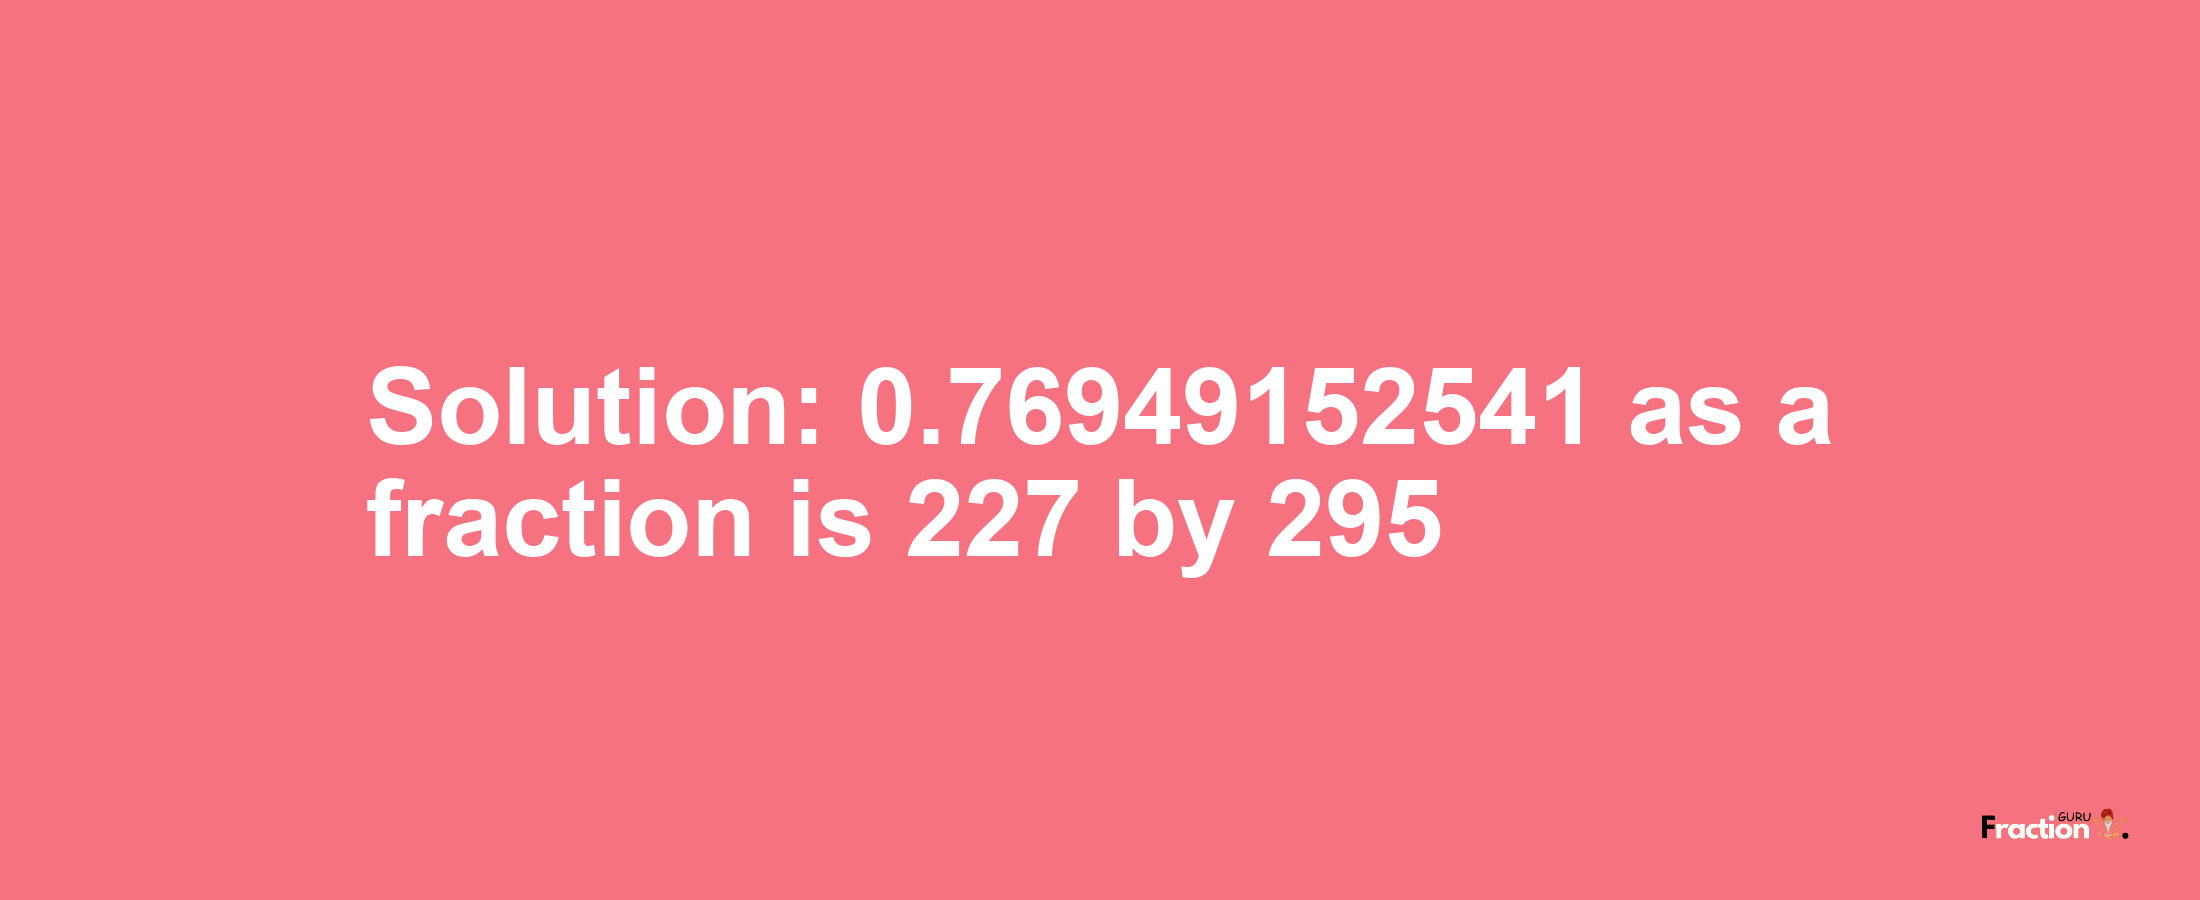 Solution:0.76949152541 as a fraction is 227/295